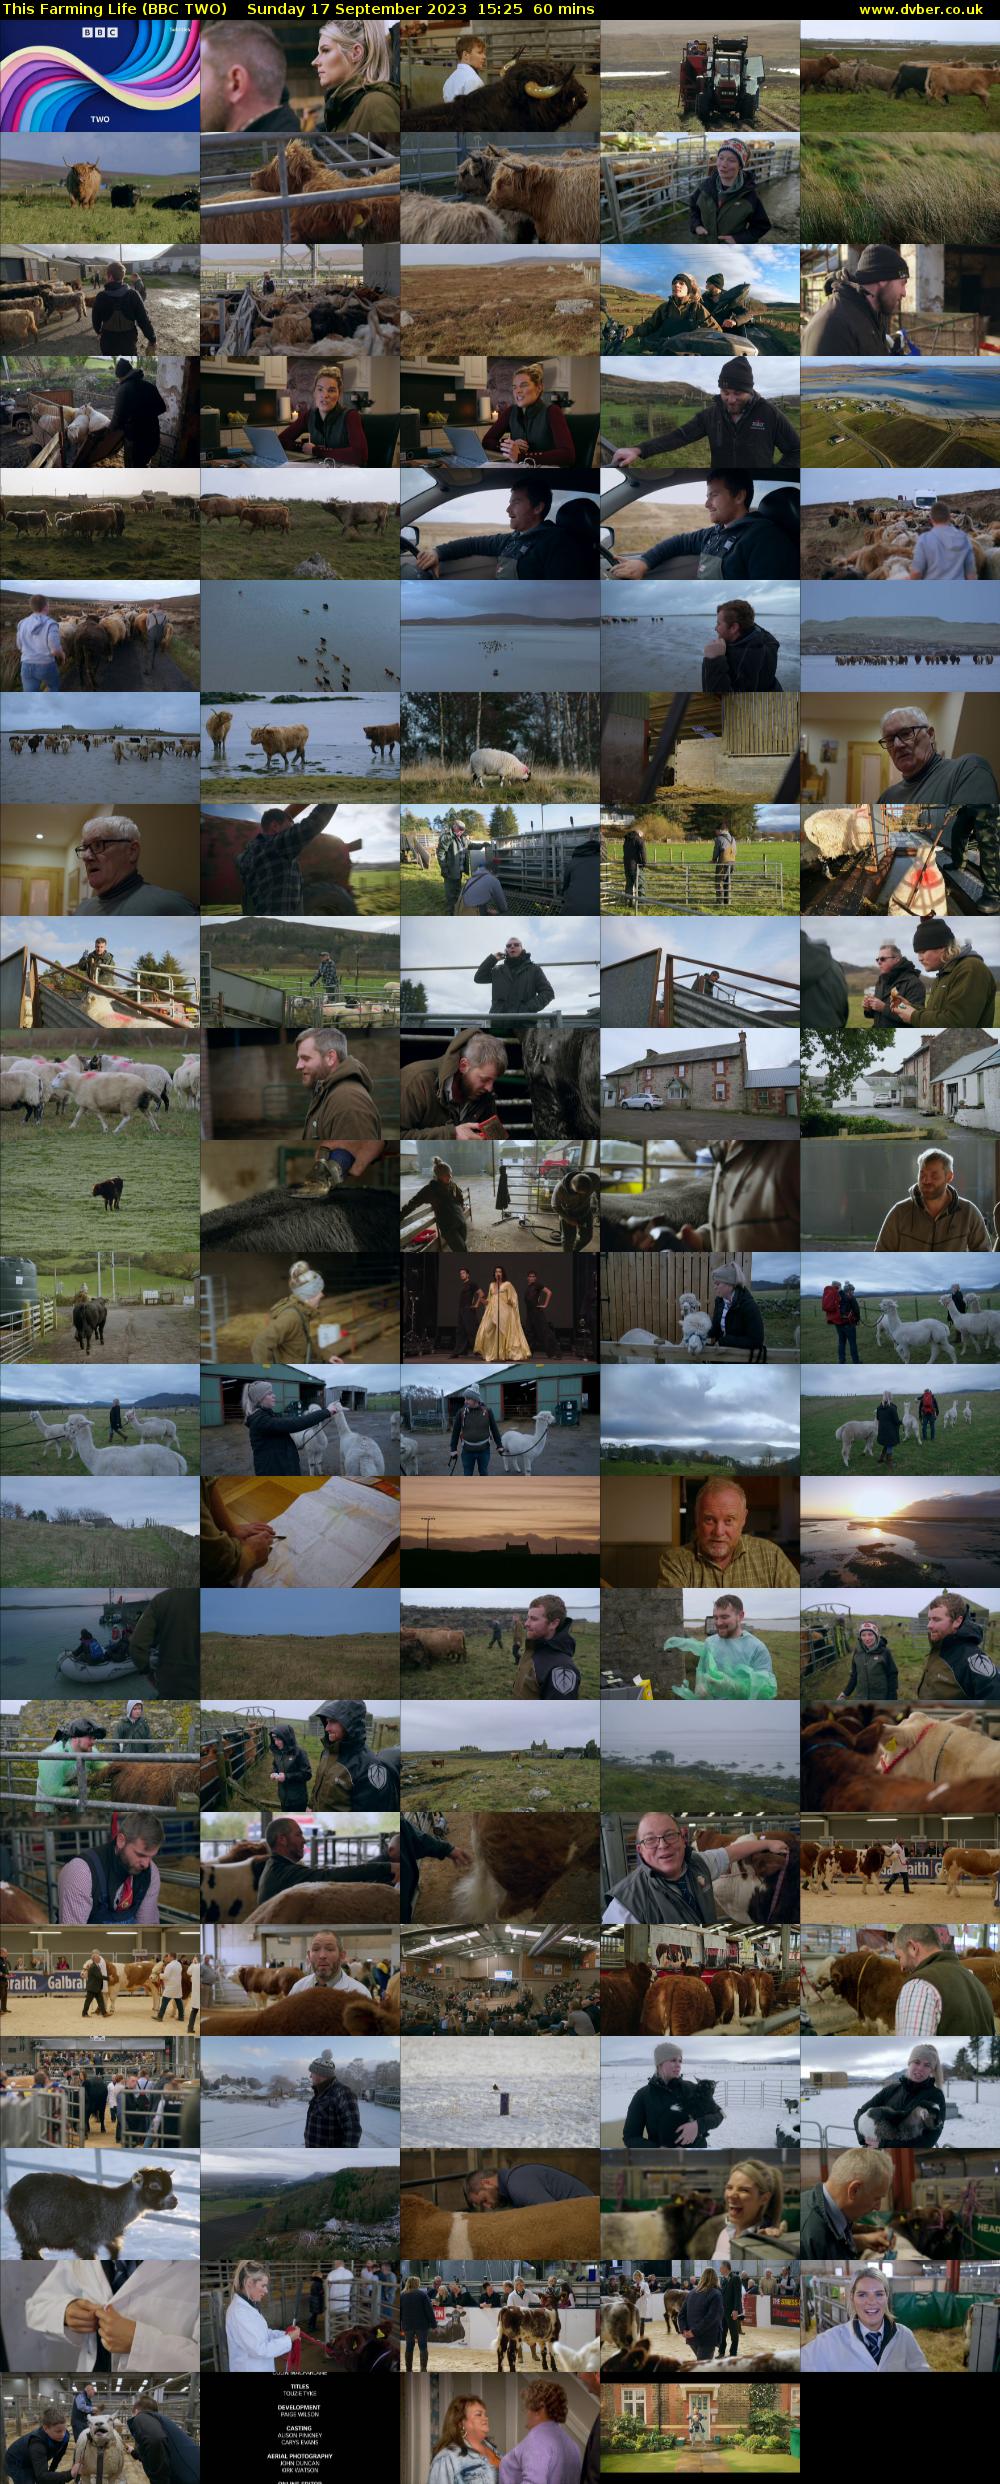 This Farming Life (BBC TWO) Sunday 17 September 2023 15:25 - 16:25